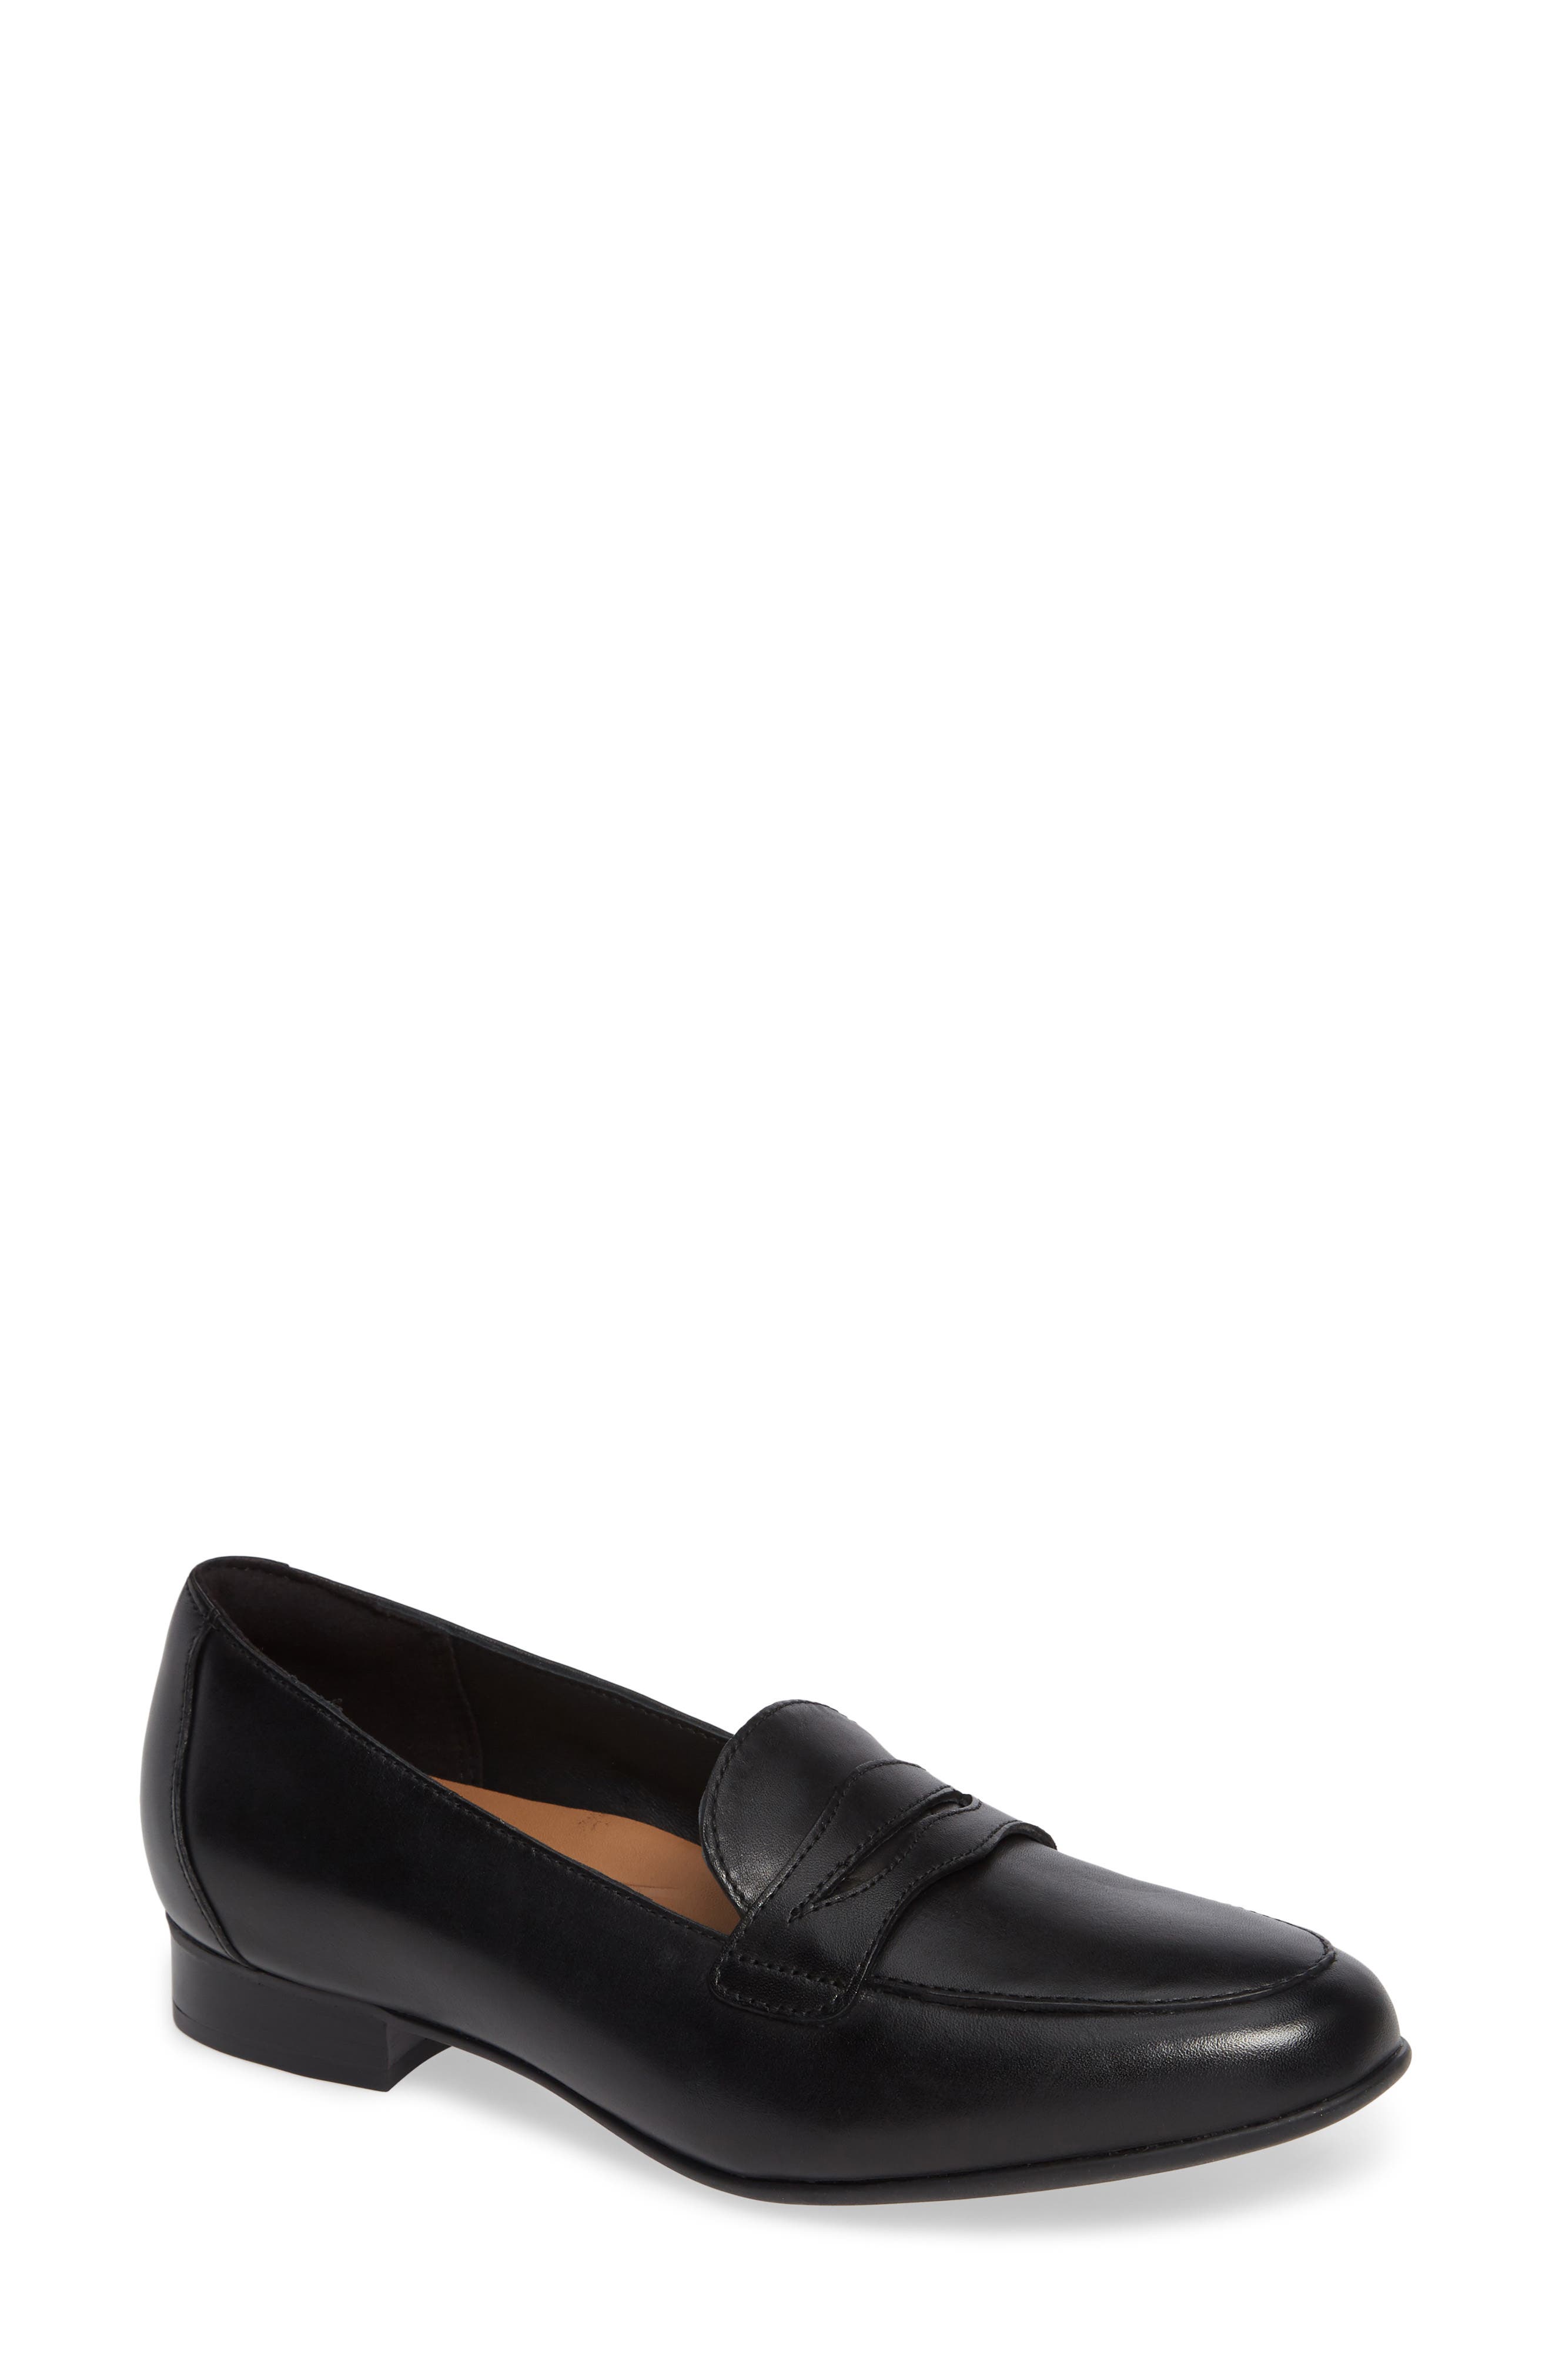 clarks penny loafers womens